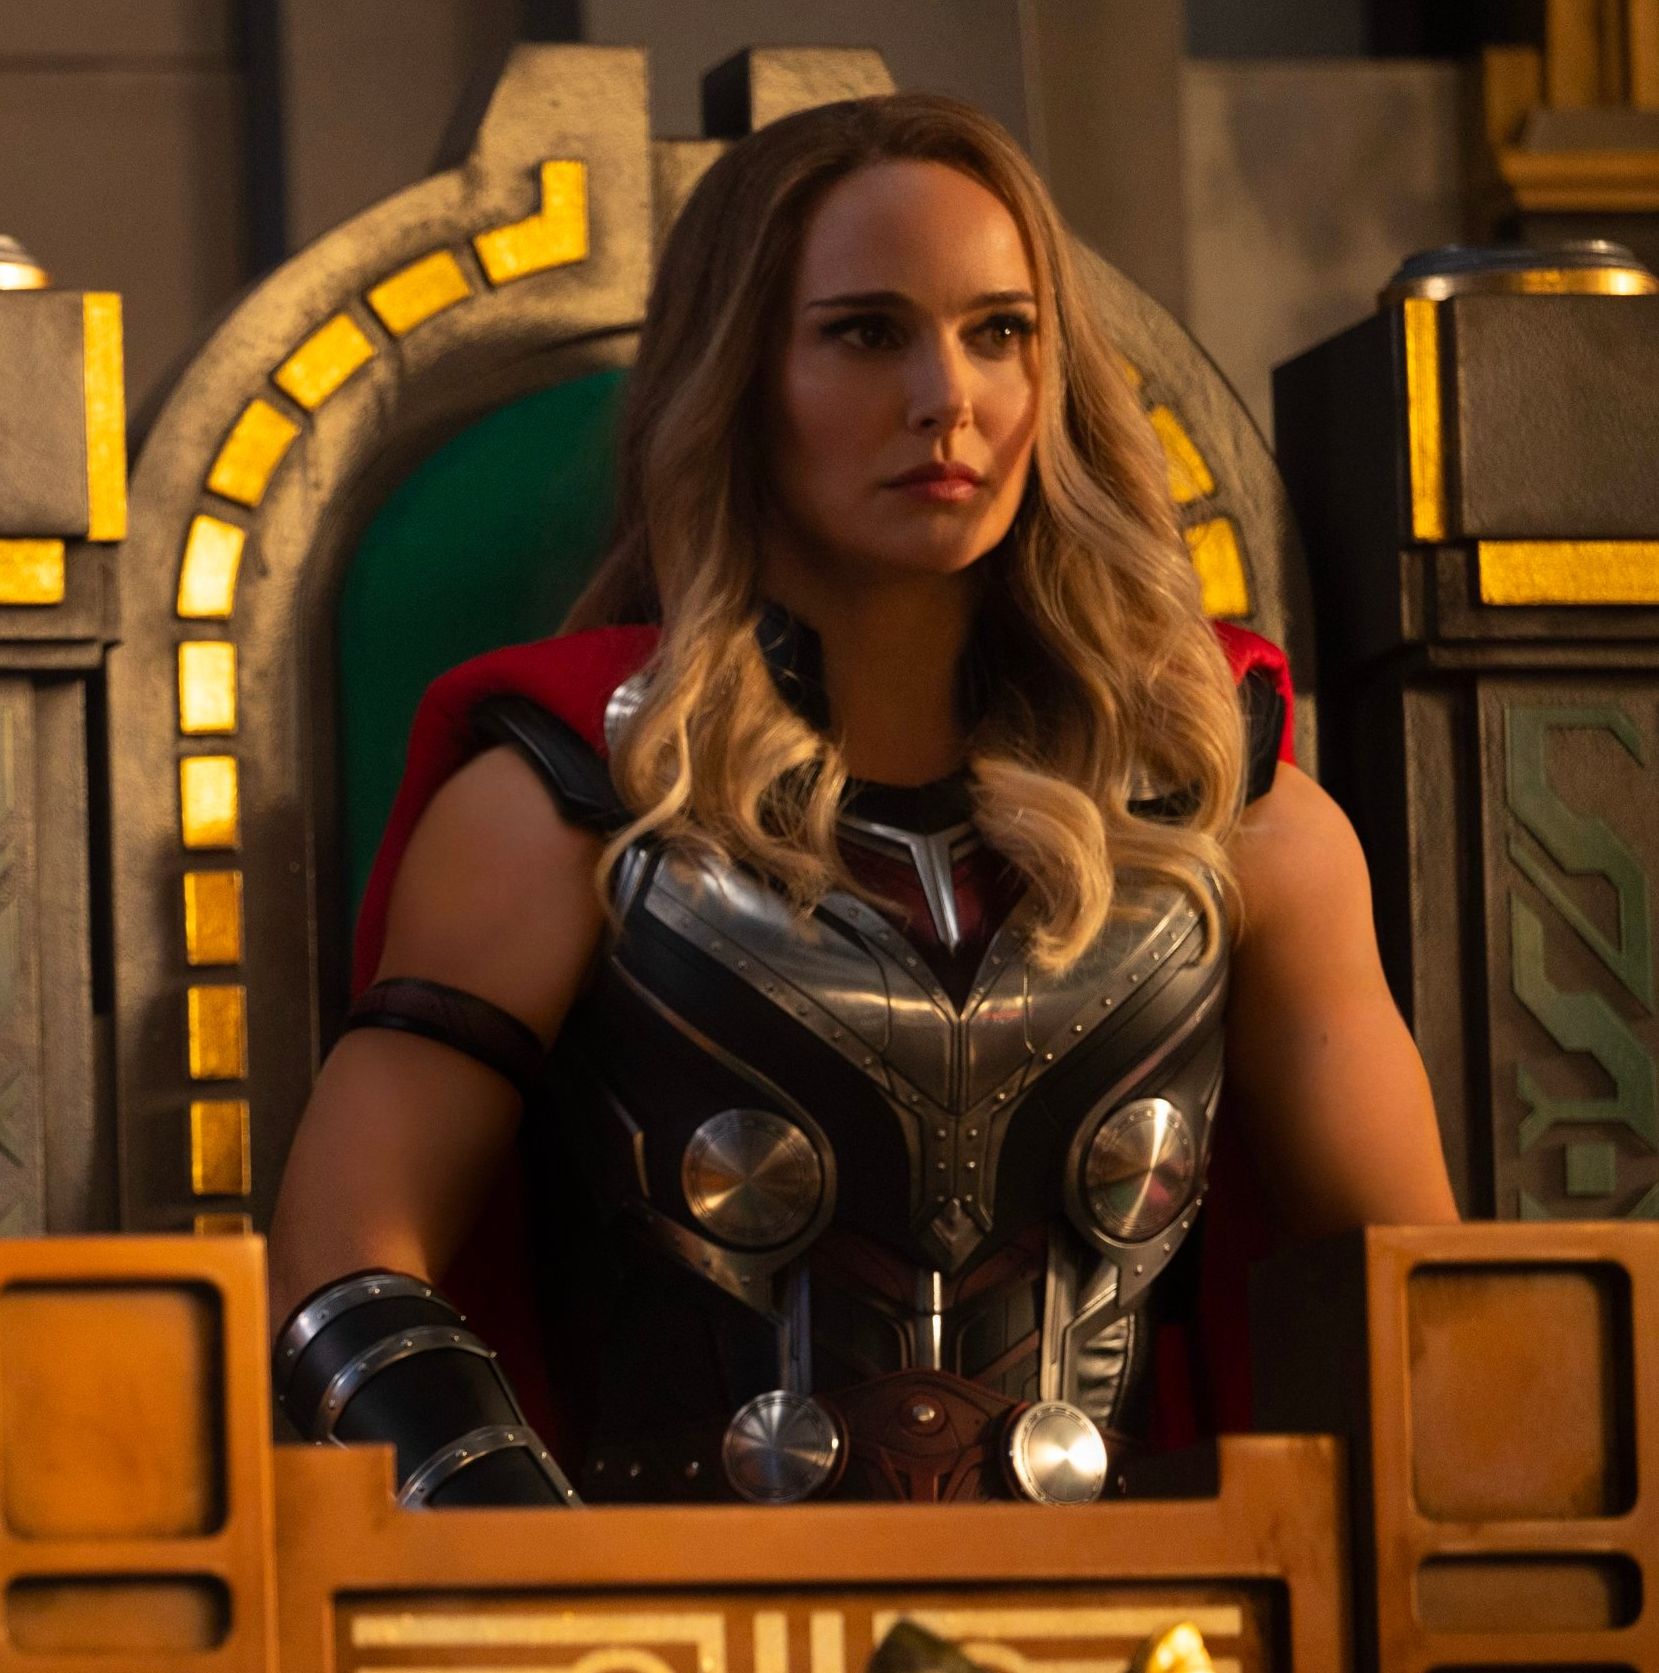 Natalie Portman and Tessa Thompson Show Their Godlike Arms in ‘Love and Thunder’ Photo